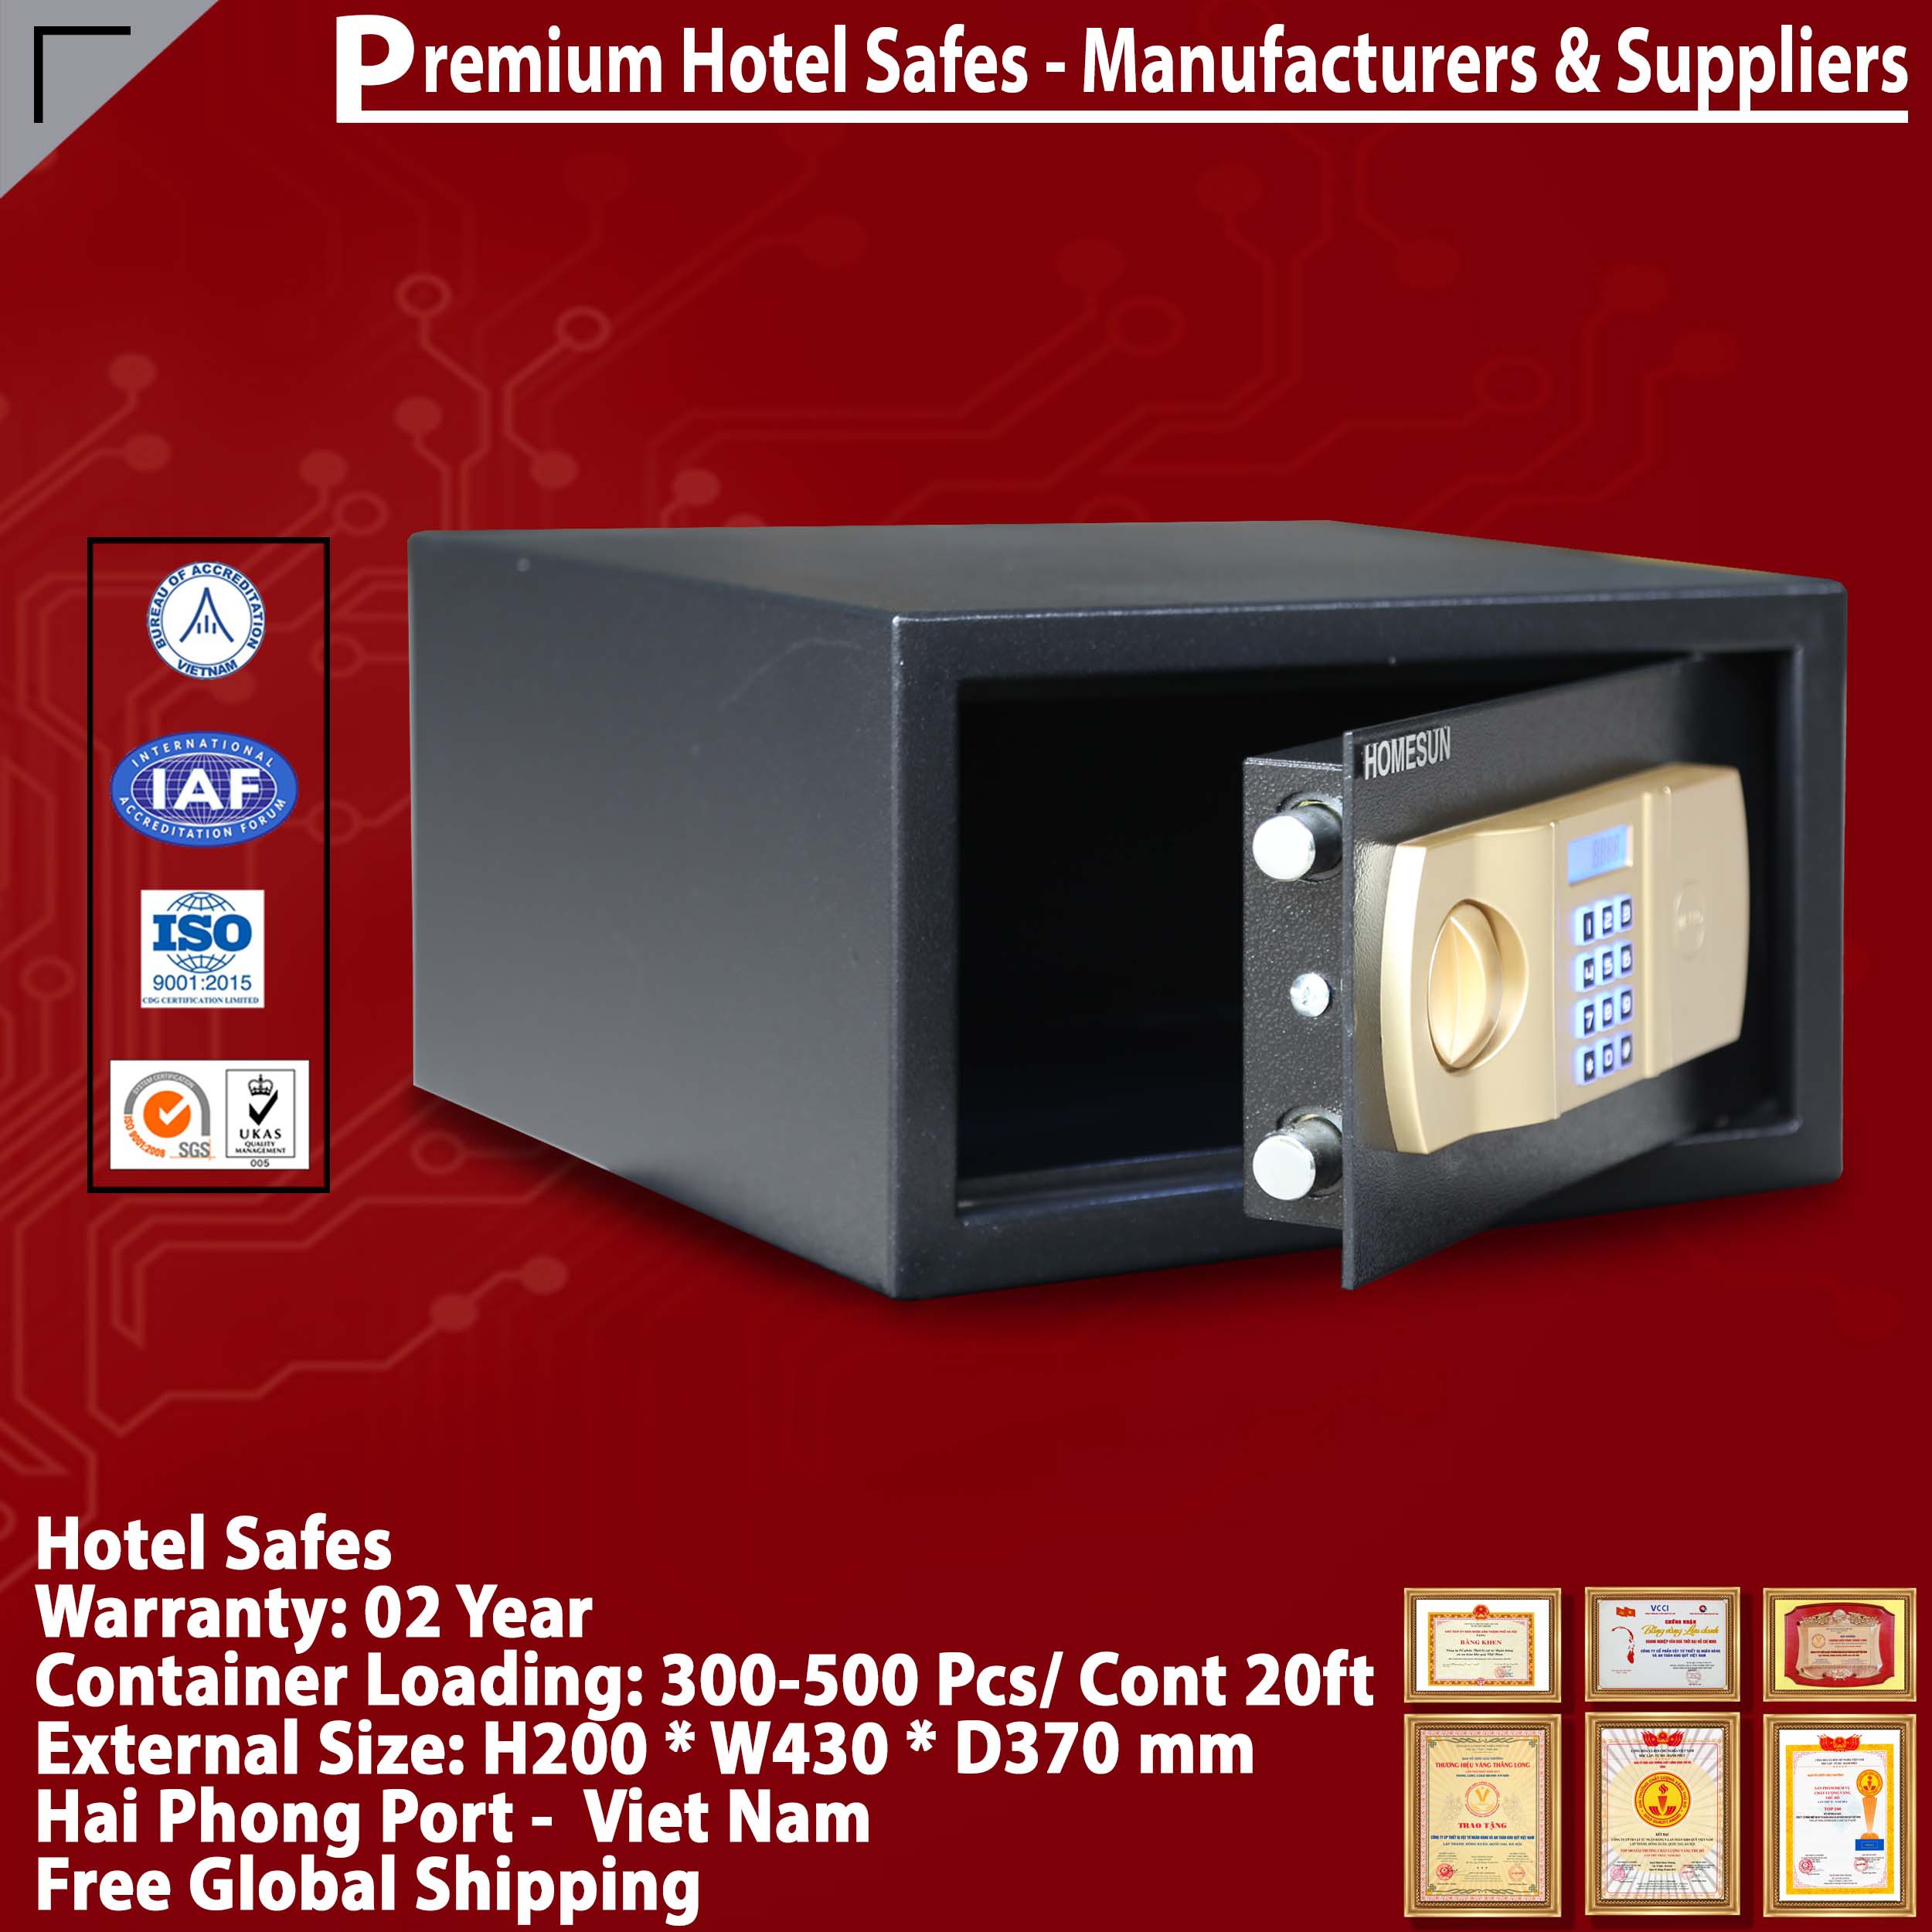 Best Sellers In Hotel Safes High Quality Price Ratio‎ HOMESUN